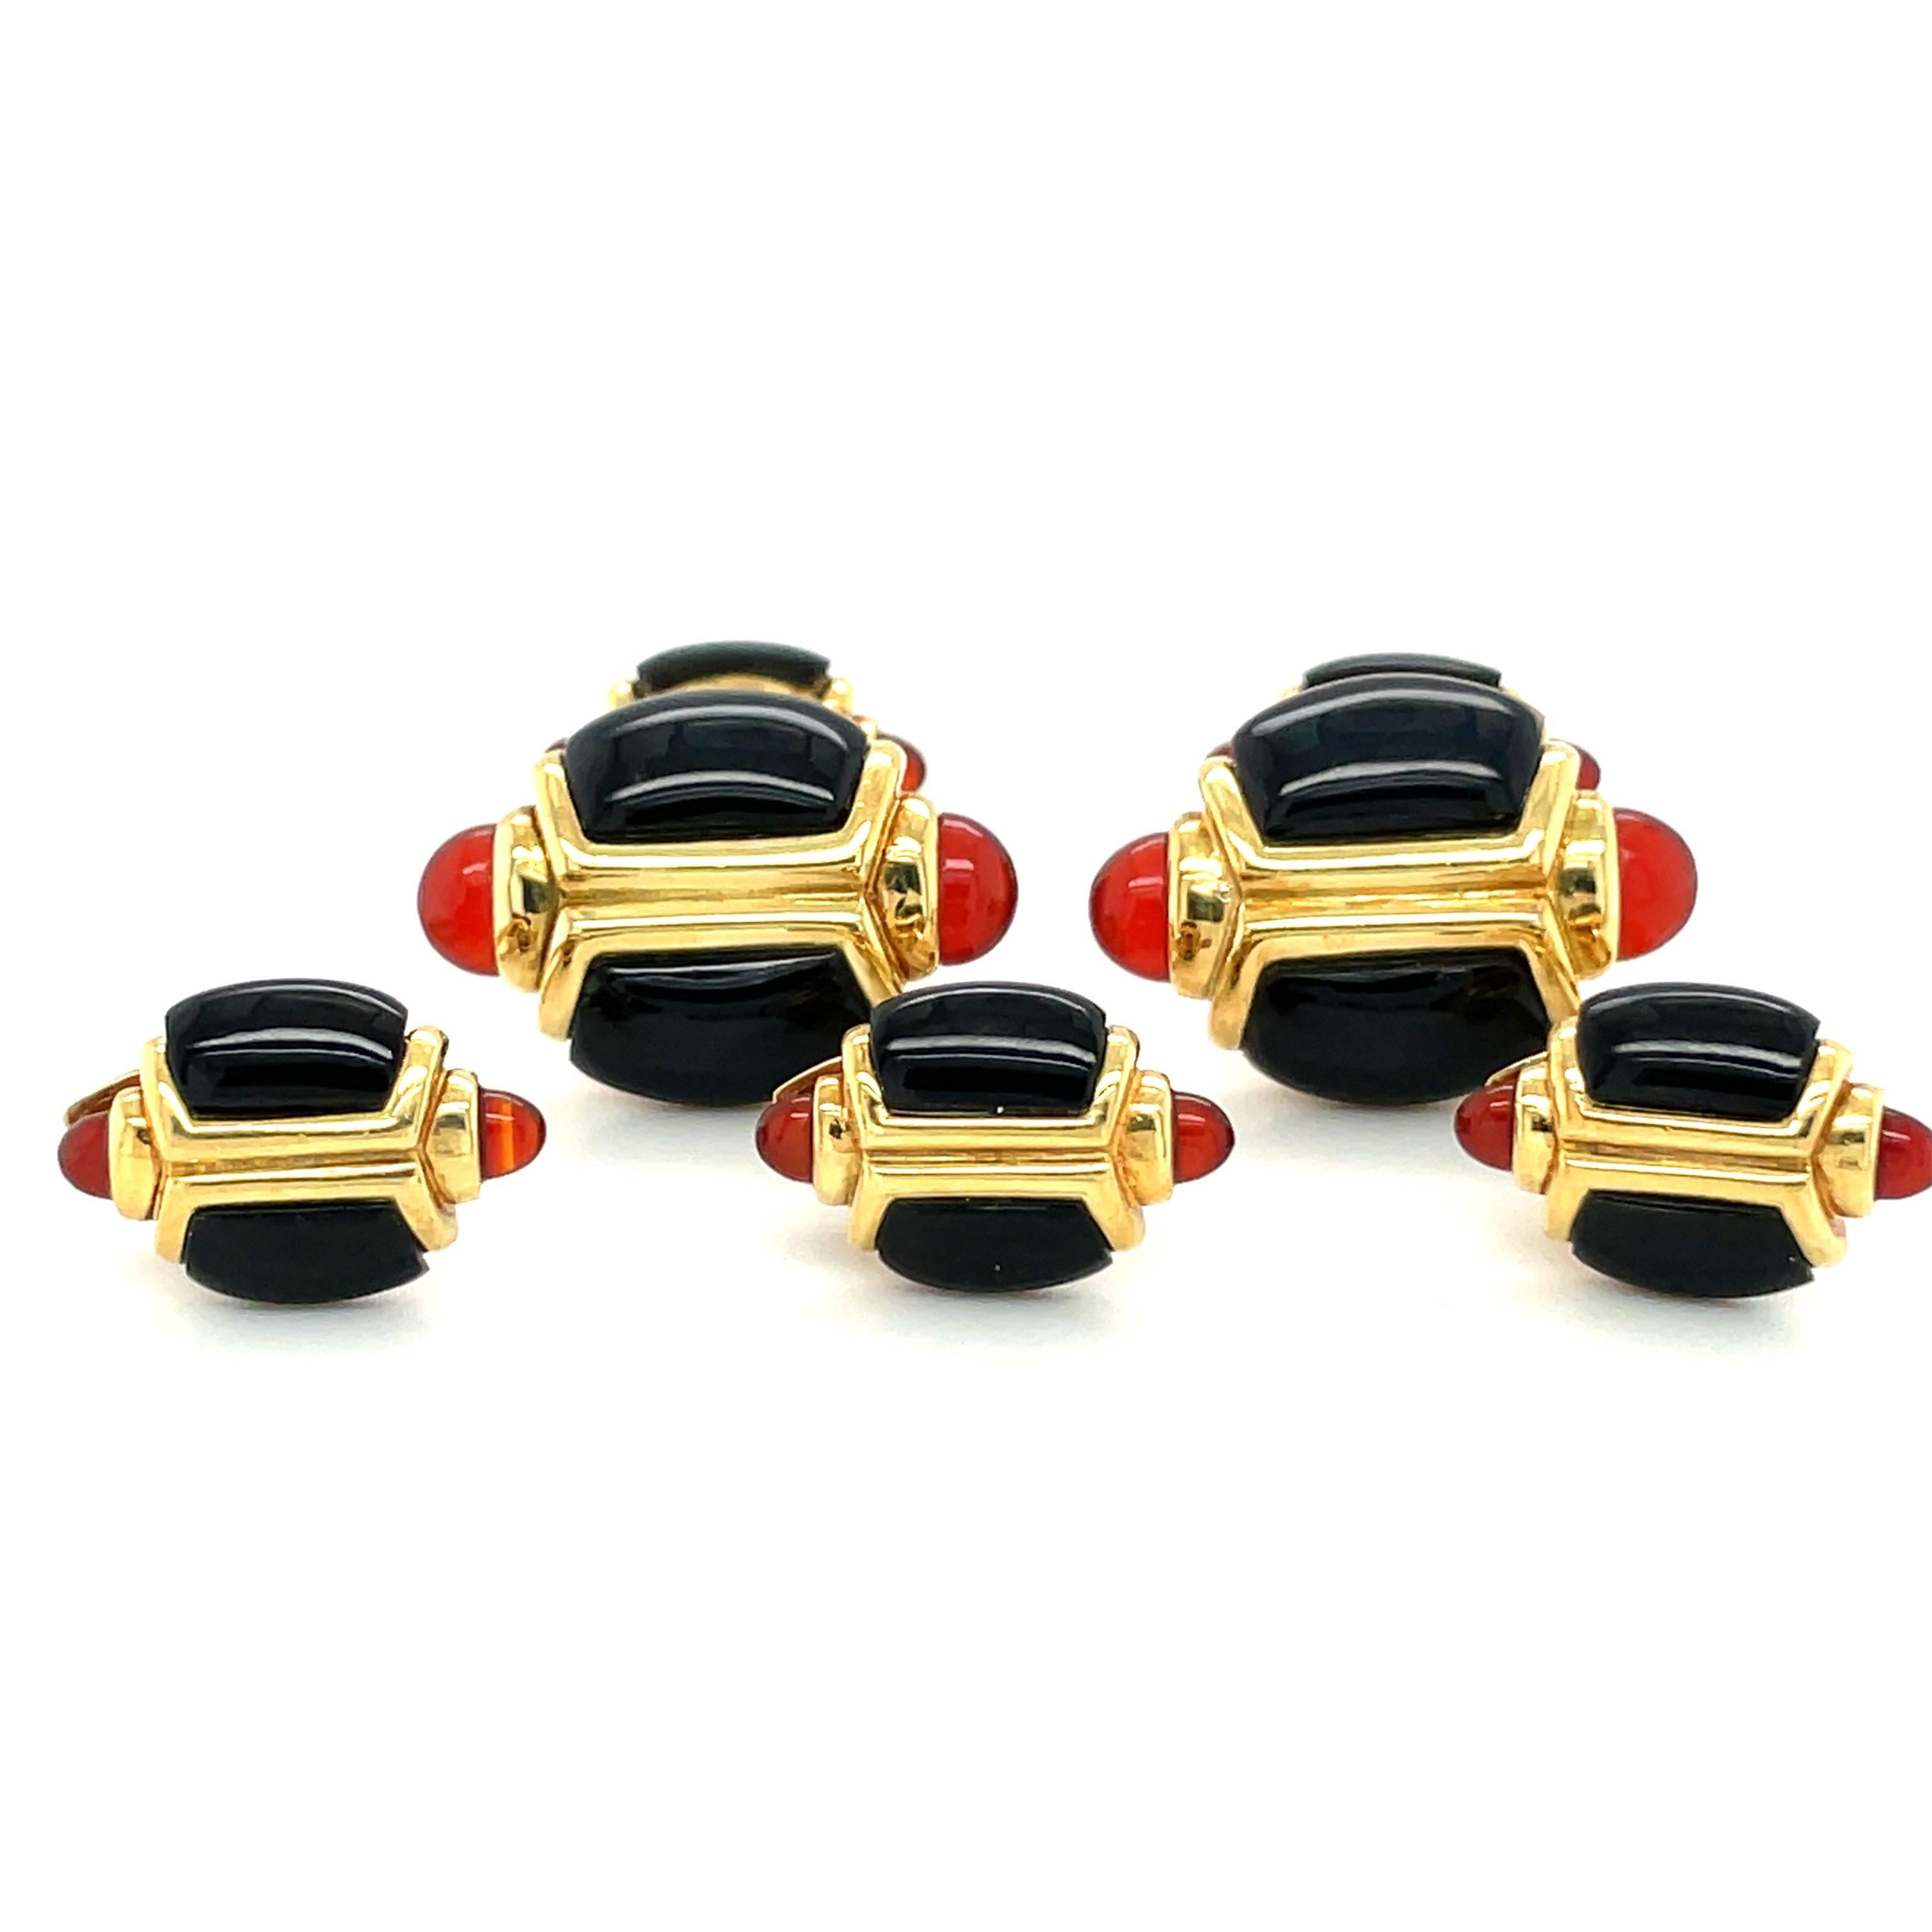 A very elegant dress set designed in 18 karat yellow gold. The wing back cuff links are oval shaped ,inlaid with black onyx and cabochon carnelian tips. The 3 studs have the same motif.
Stamped 18K with the makers mark for Albert Lipten